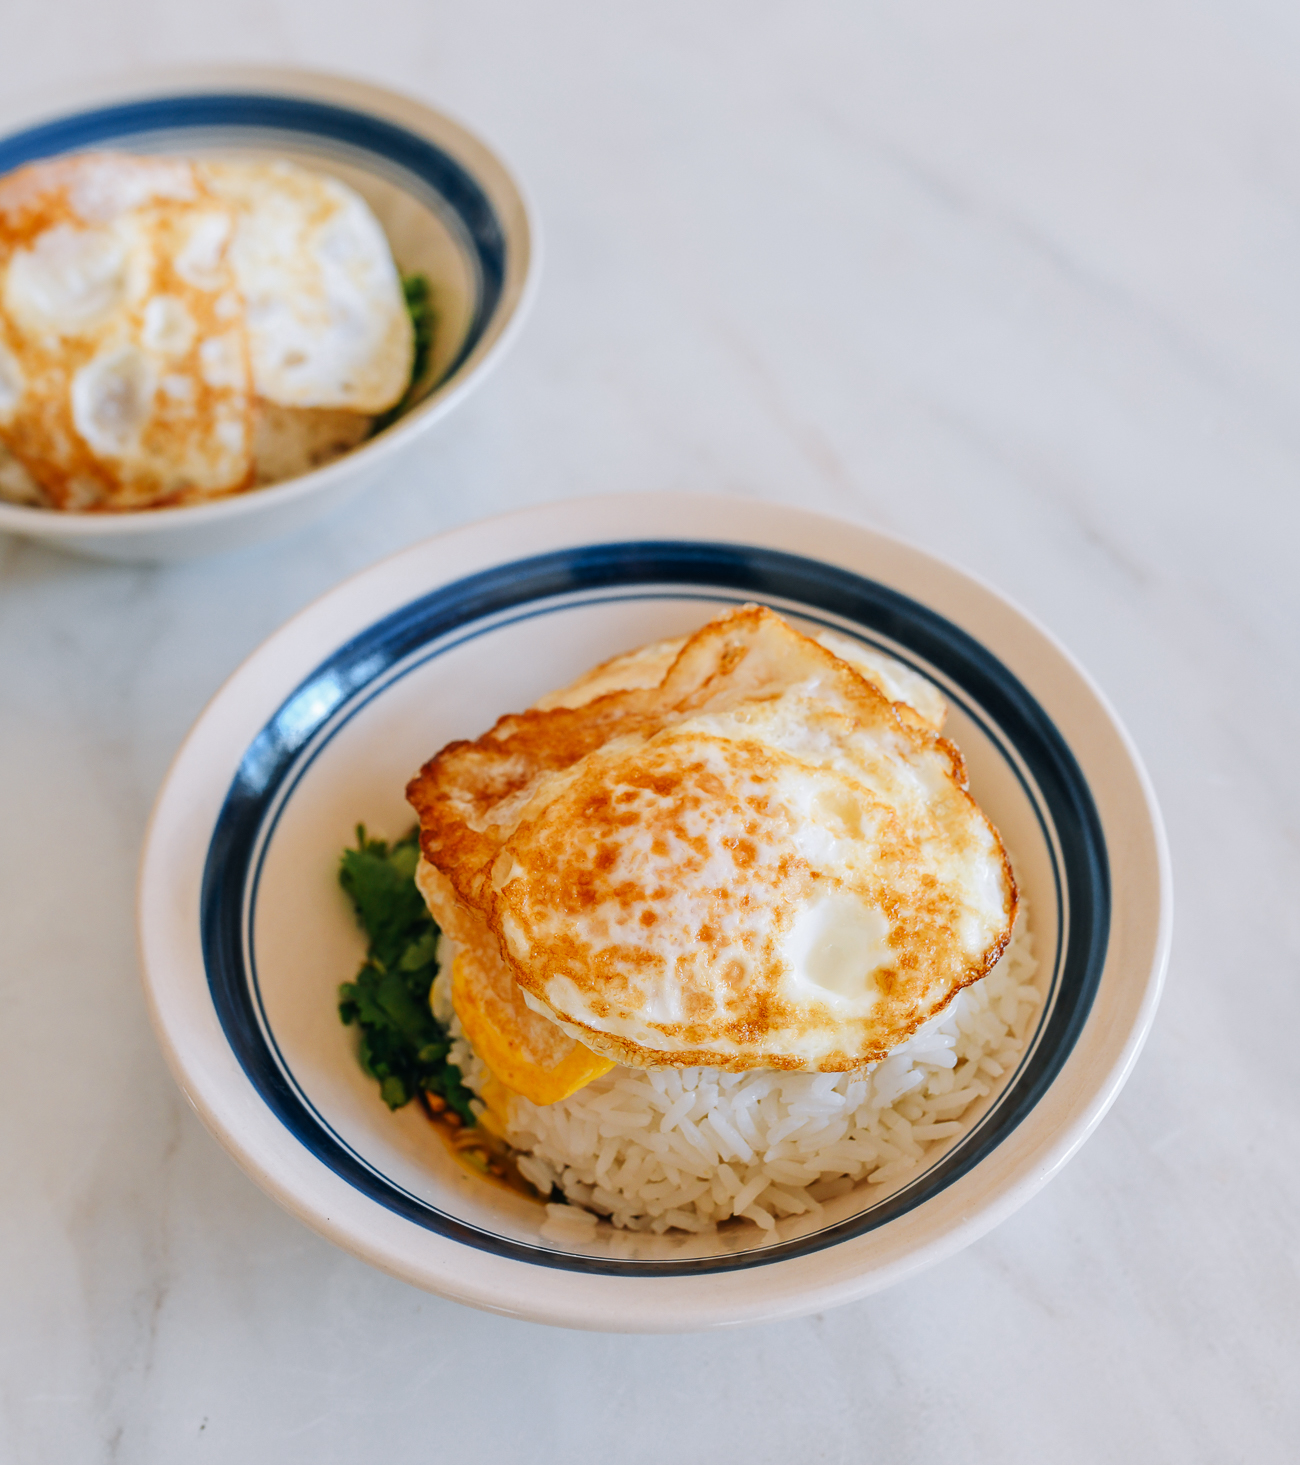 Fried egg on top of rice